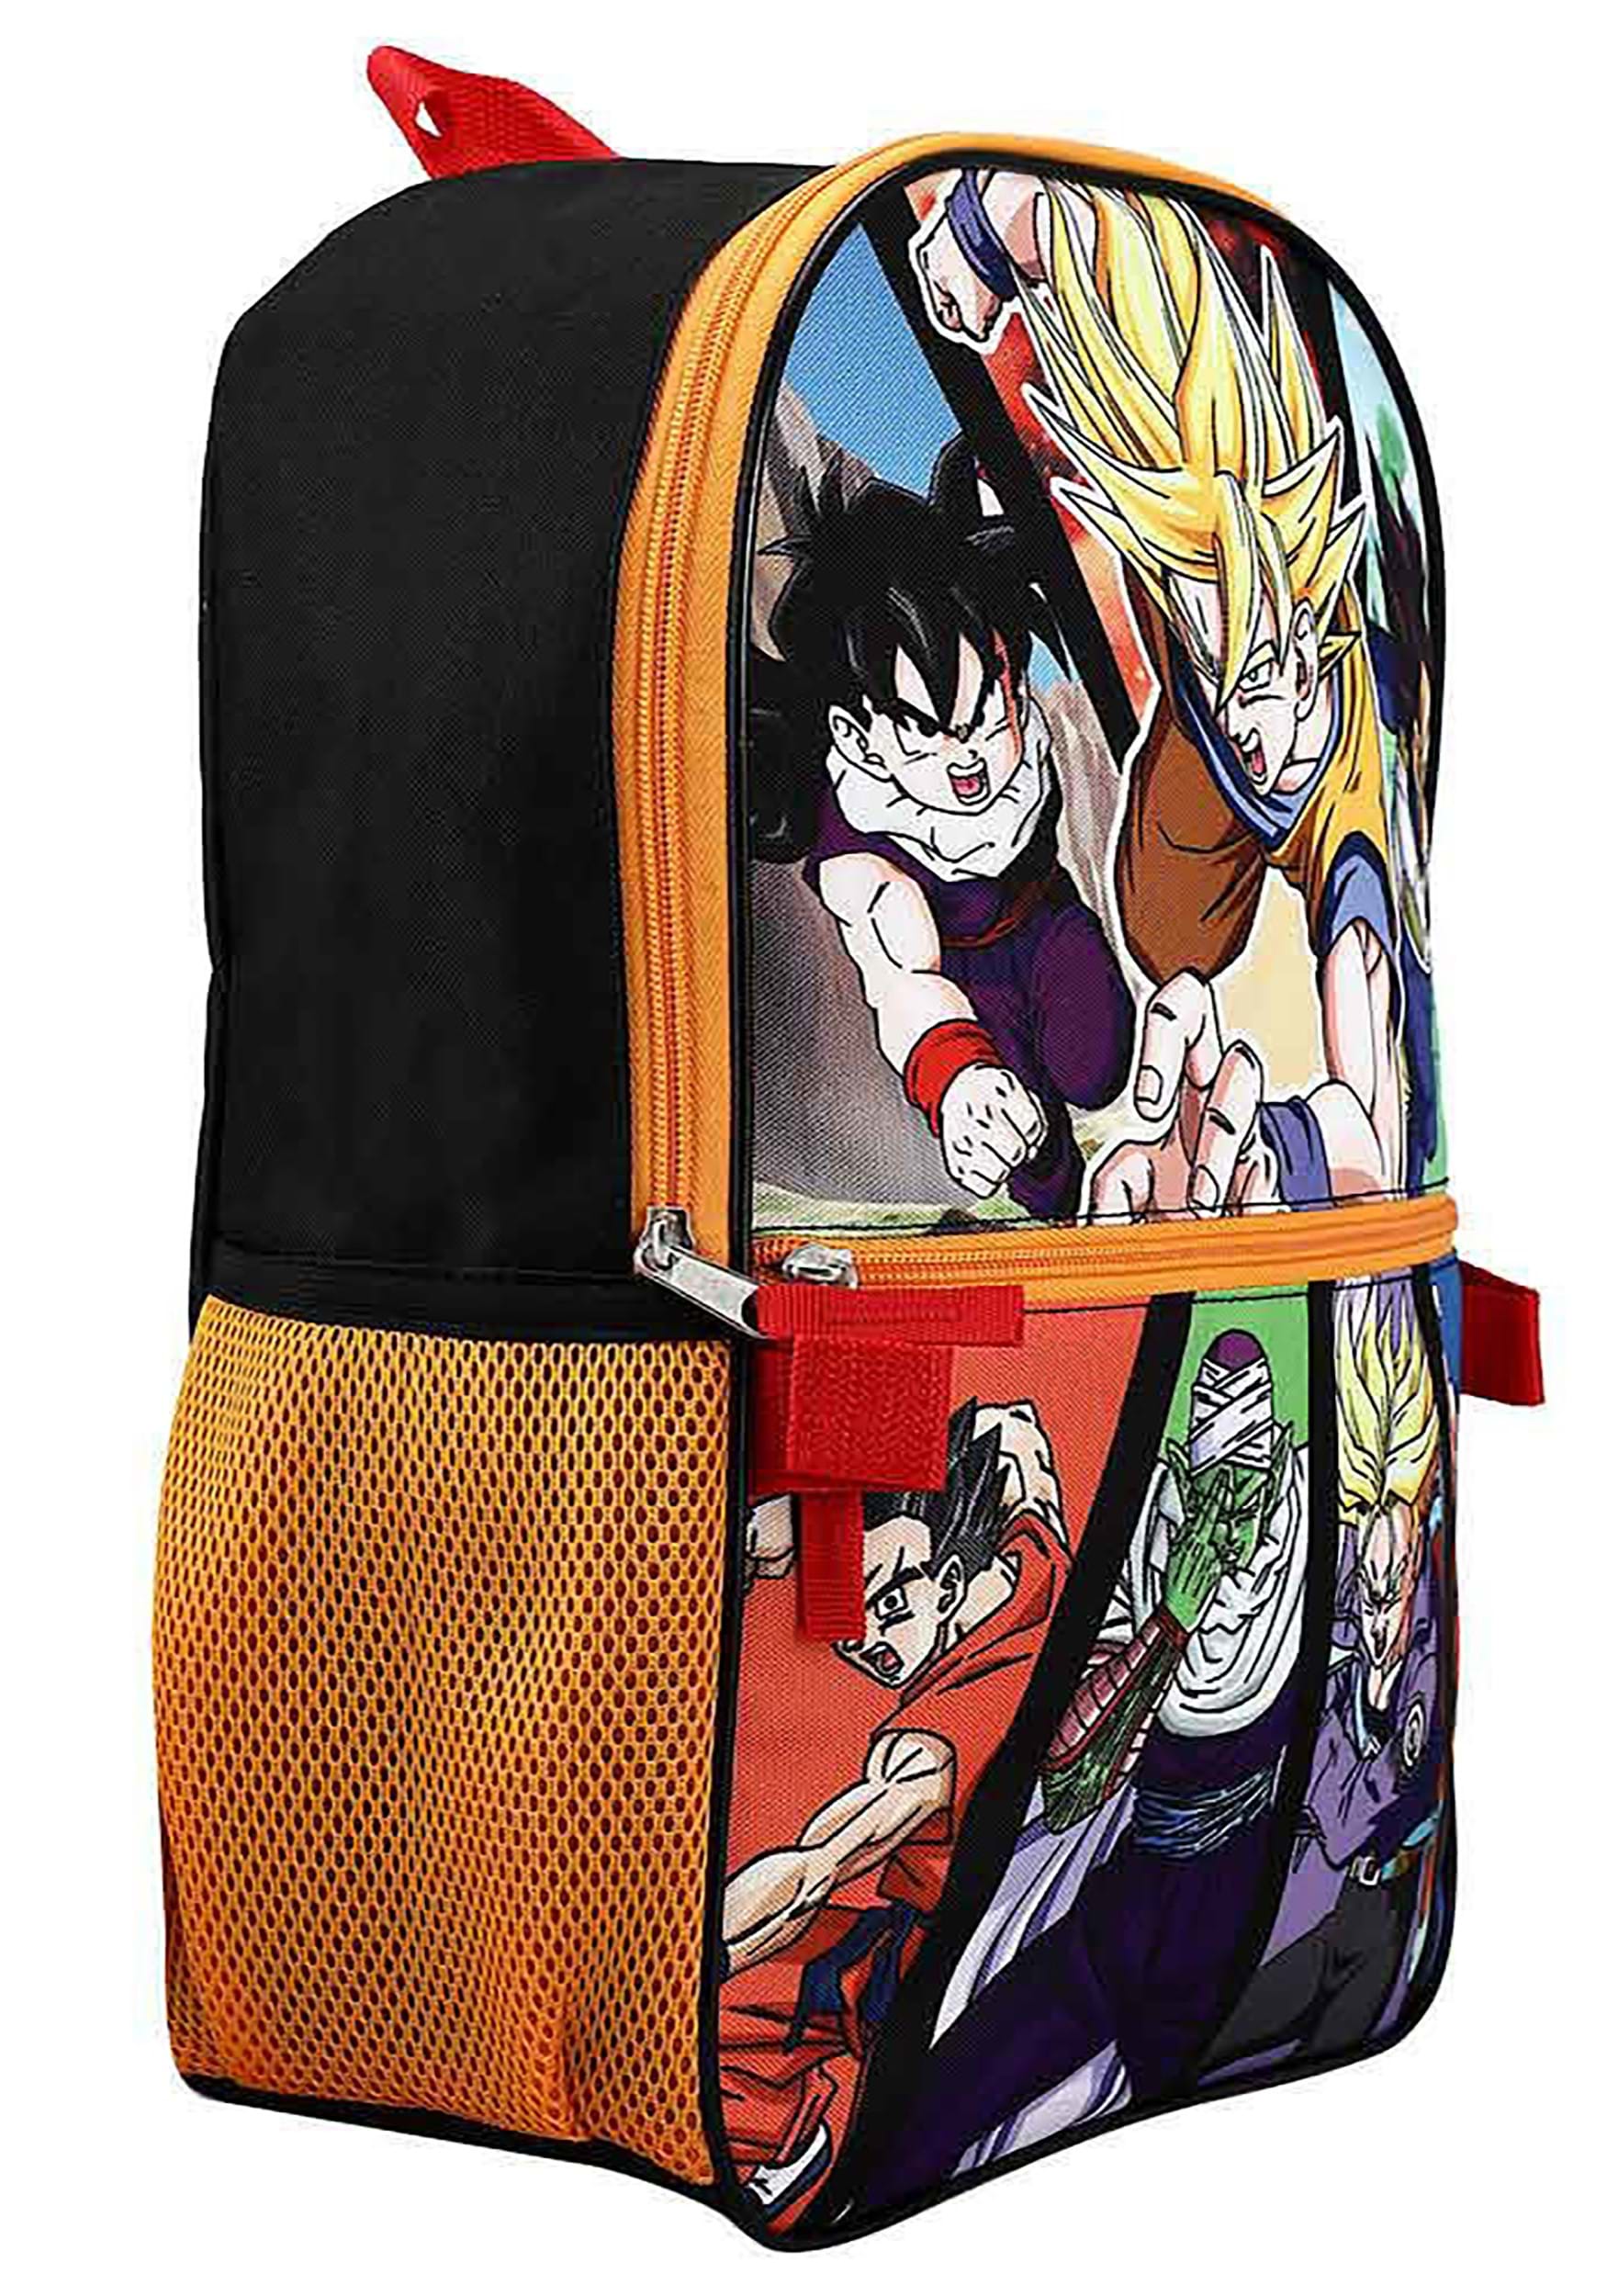 Action Comics Dragon Ball Z Backpack with Lunch Box - Bundle with 16”  Dragon Ball Backpack, Dragon Ball Lunch Bag, Stickers, More | Dragon Ball